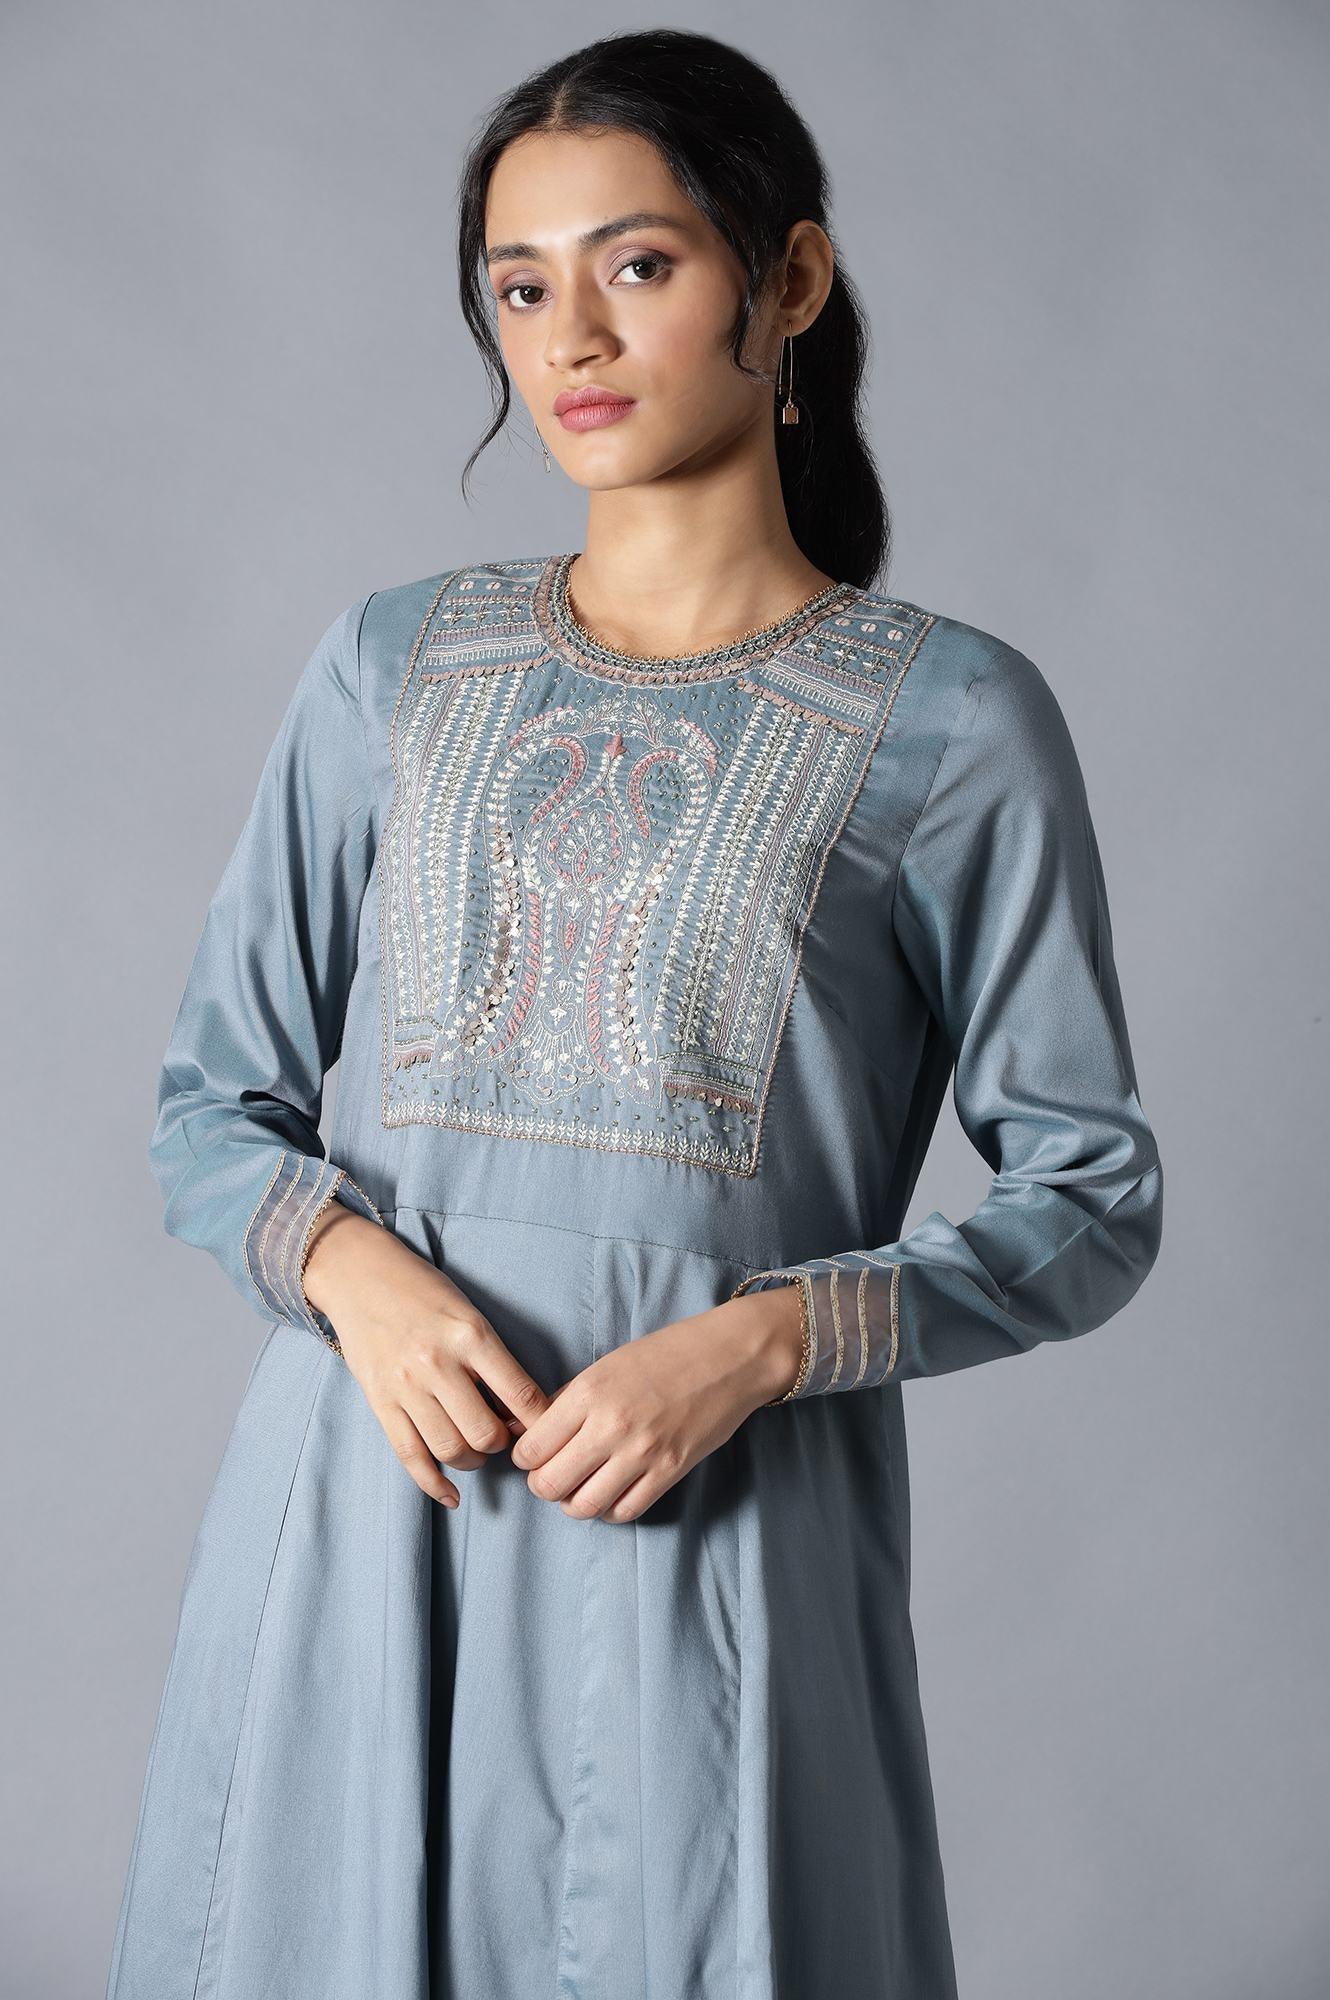 Blue Flared Round Neck Mughal Gown With Embroidery - wforwoman